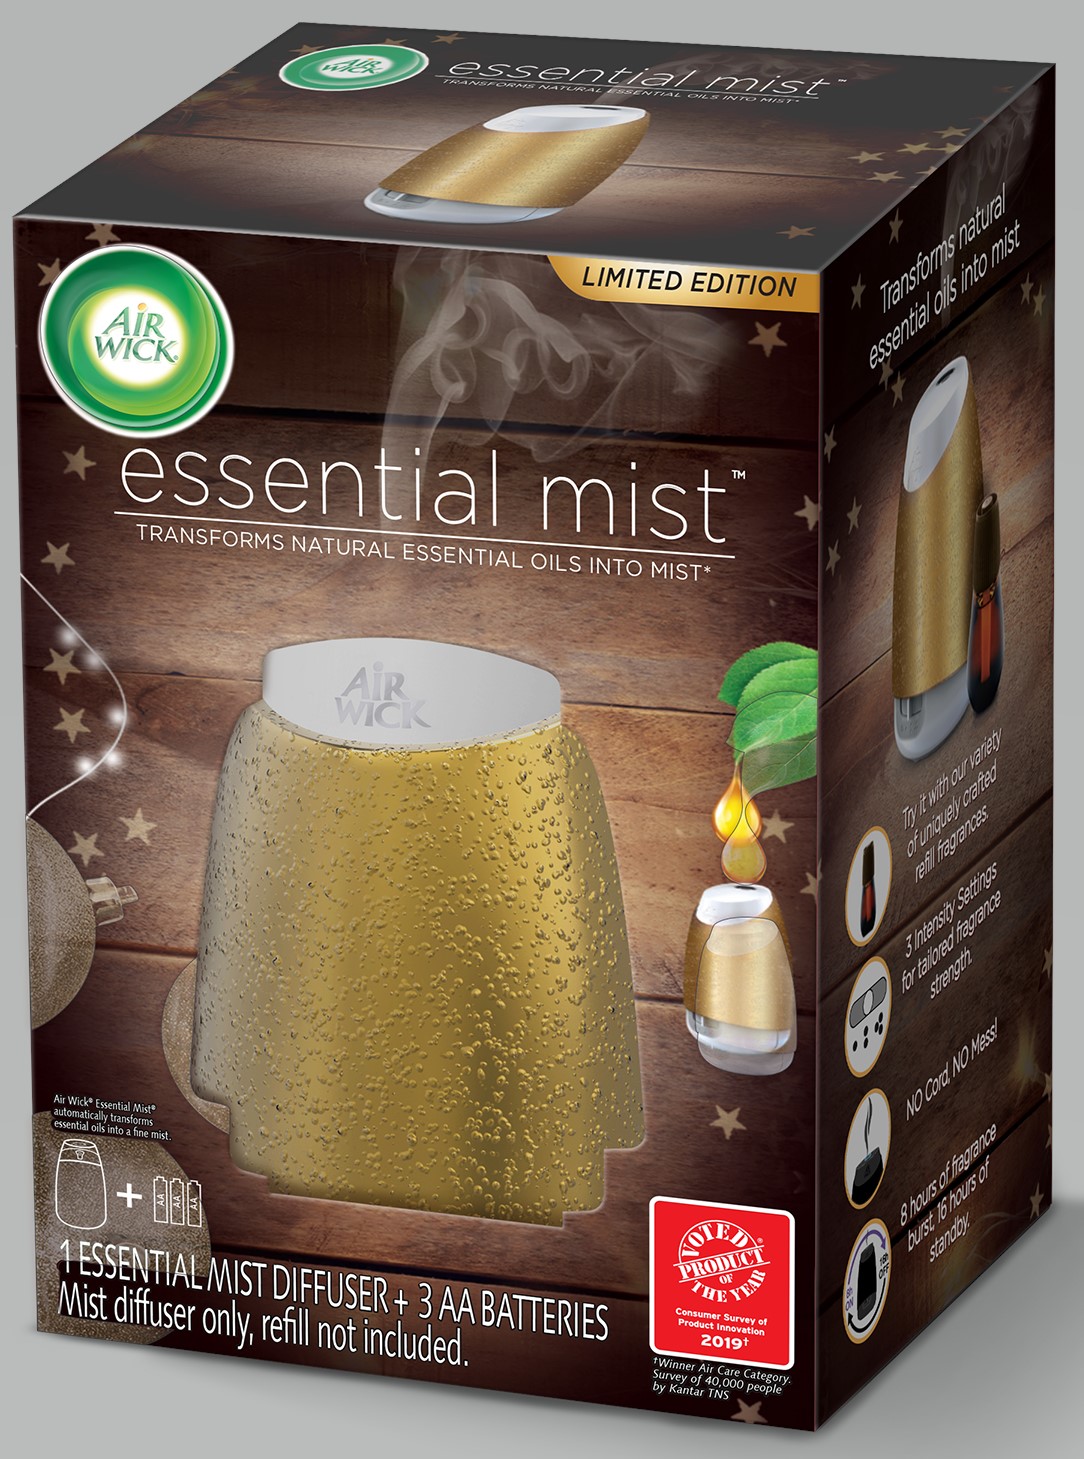 AIR WICK Essential Mist Diffuser Discontinued